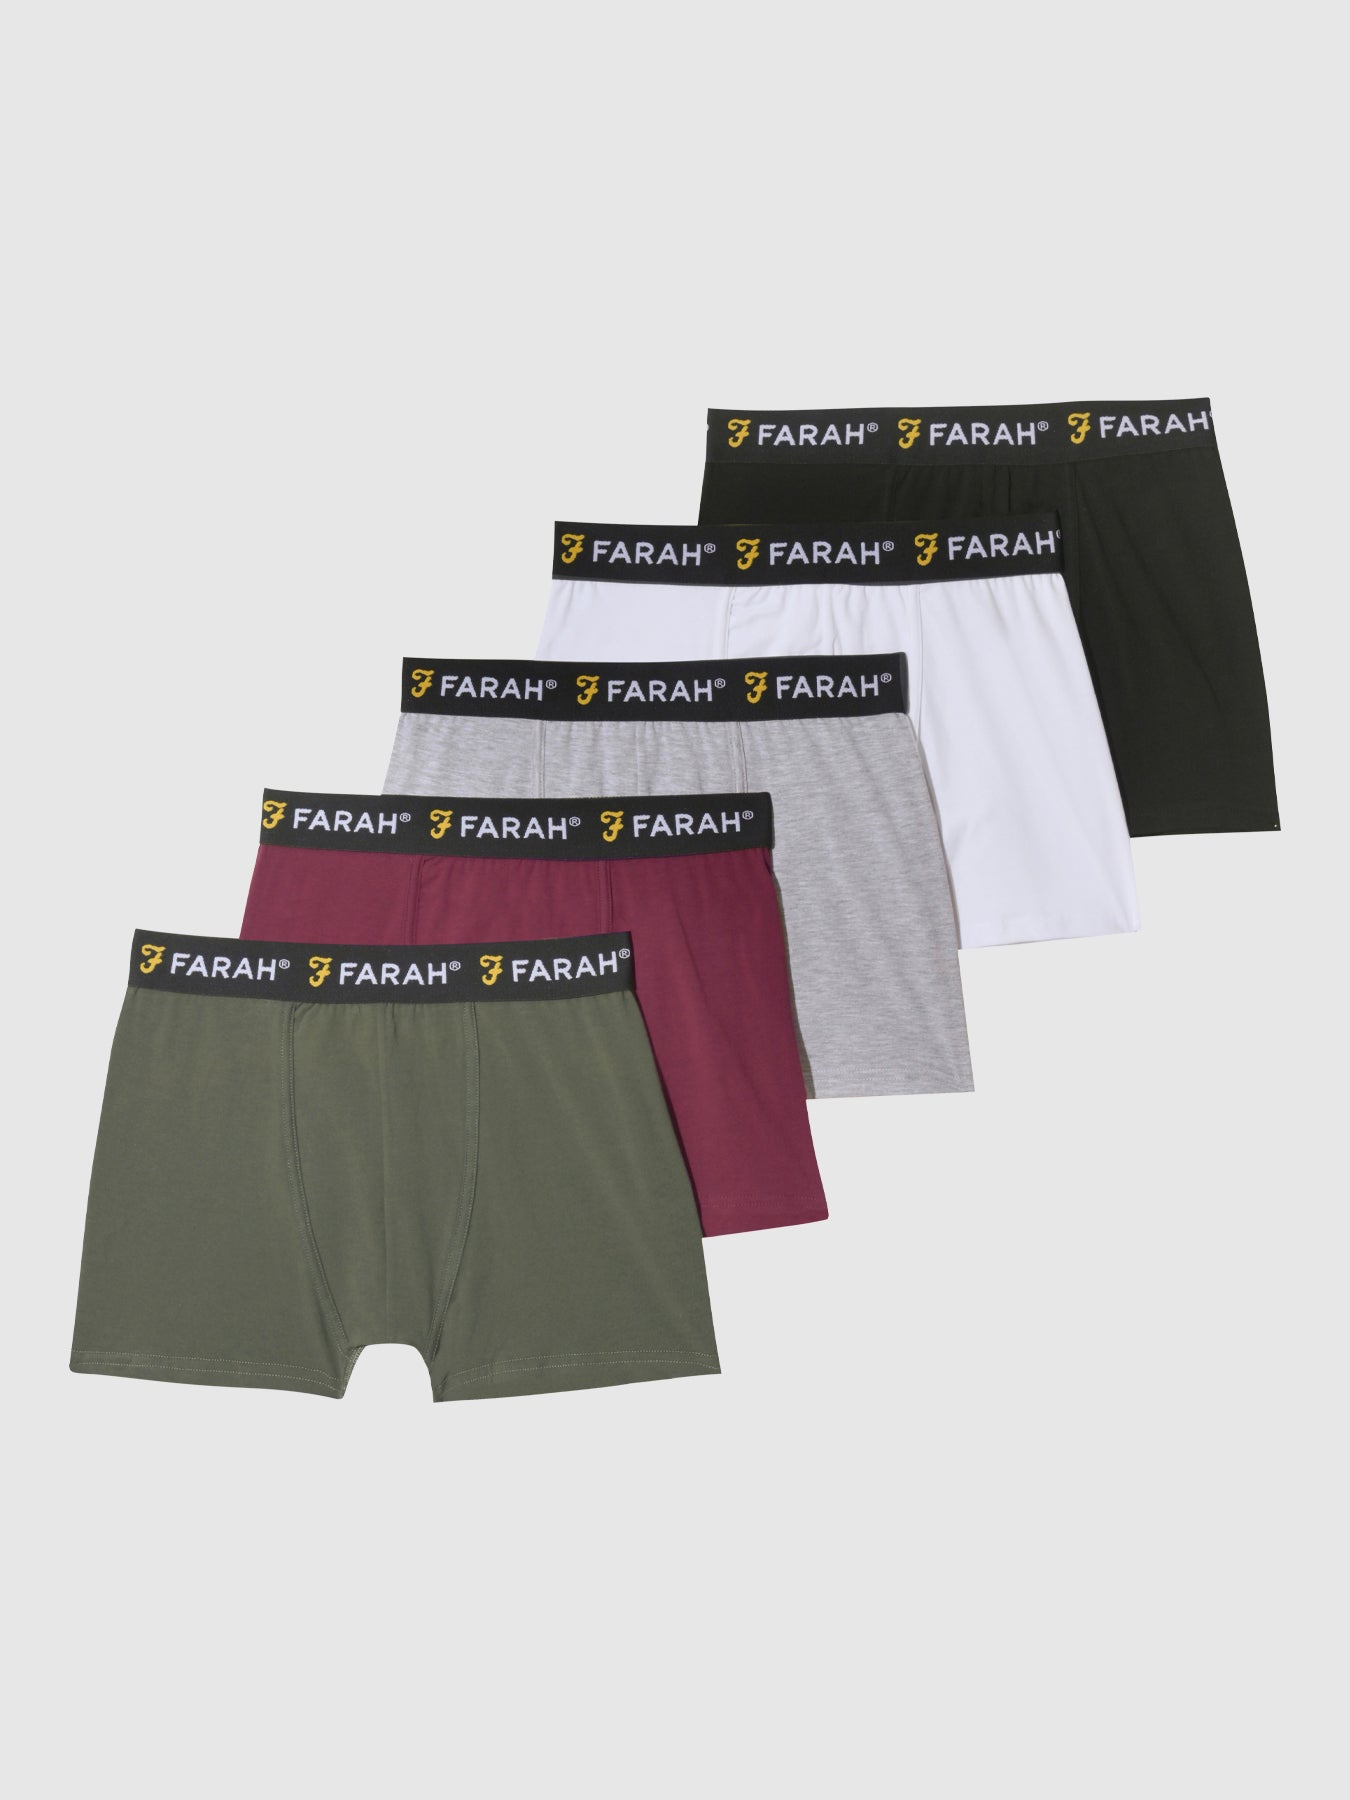 View 5 Pack Gaveer Boxers In Assorted Colours information